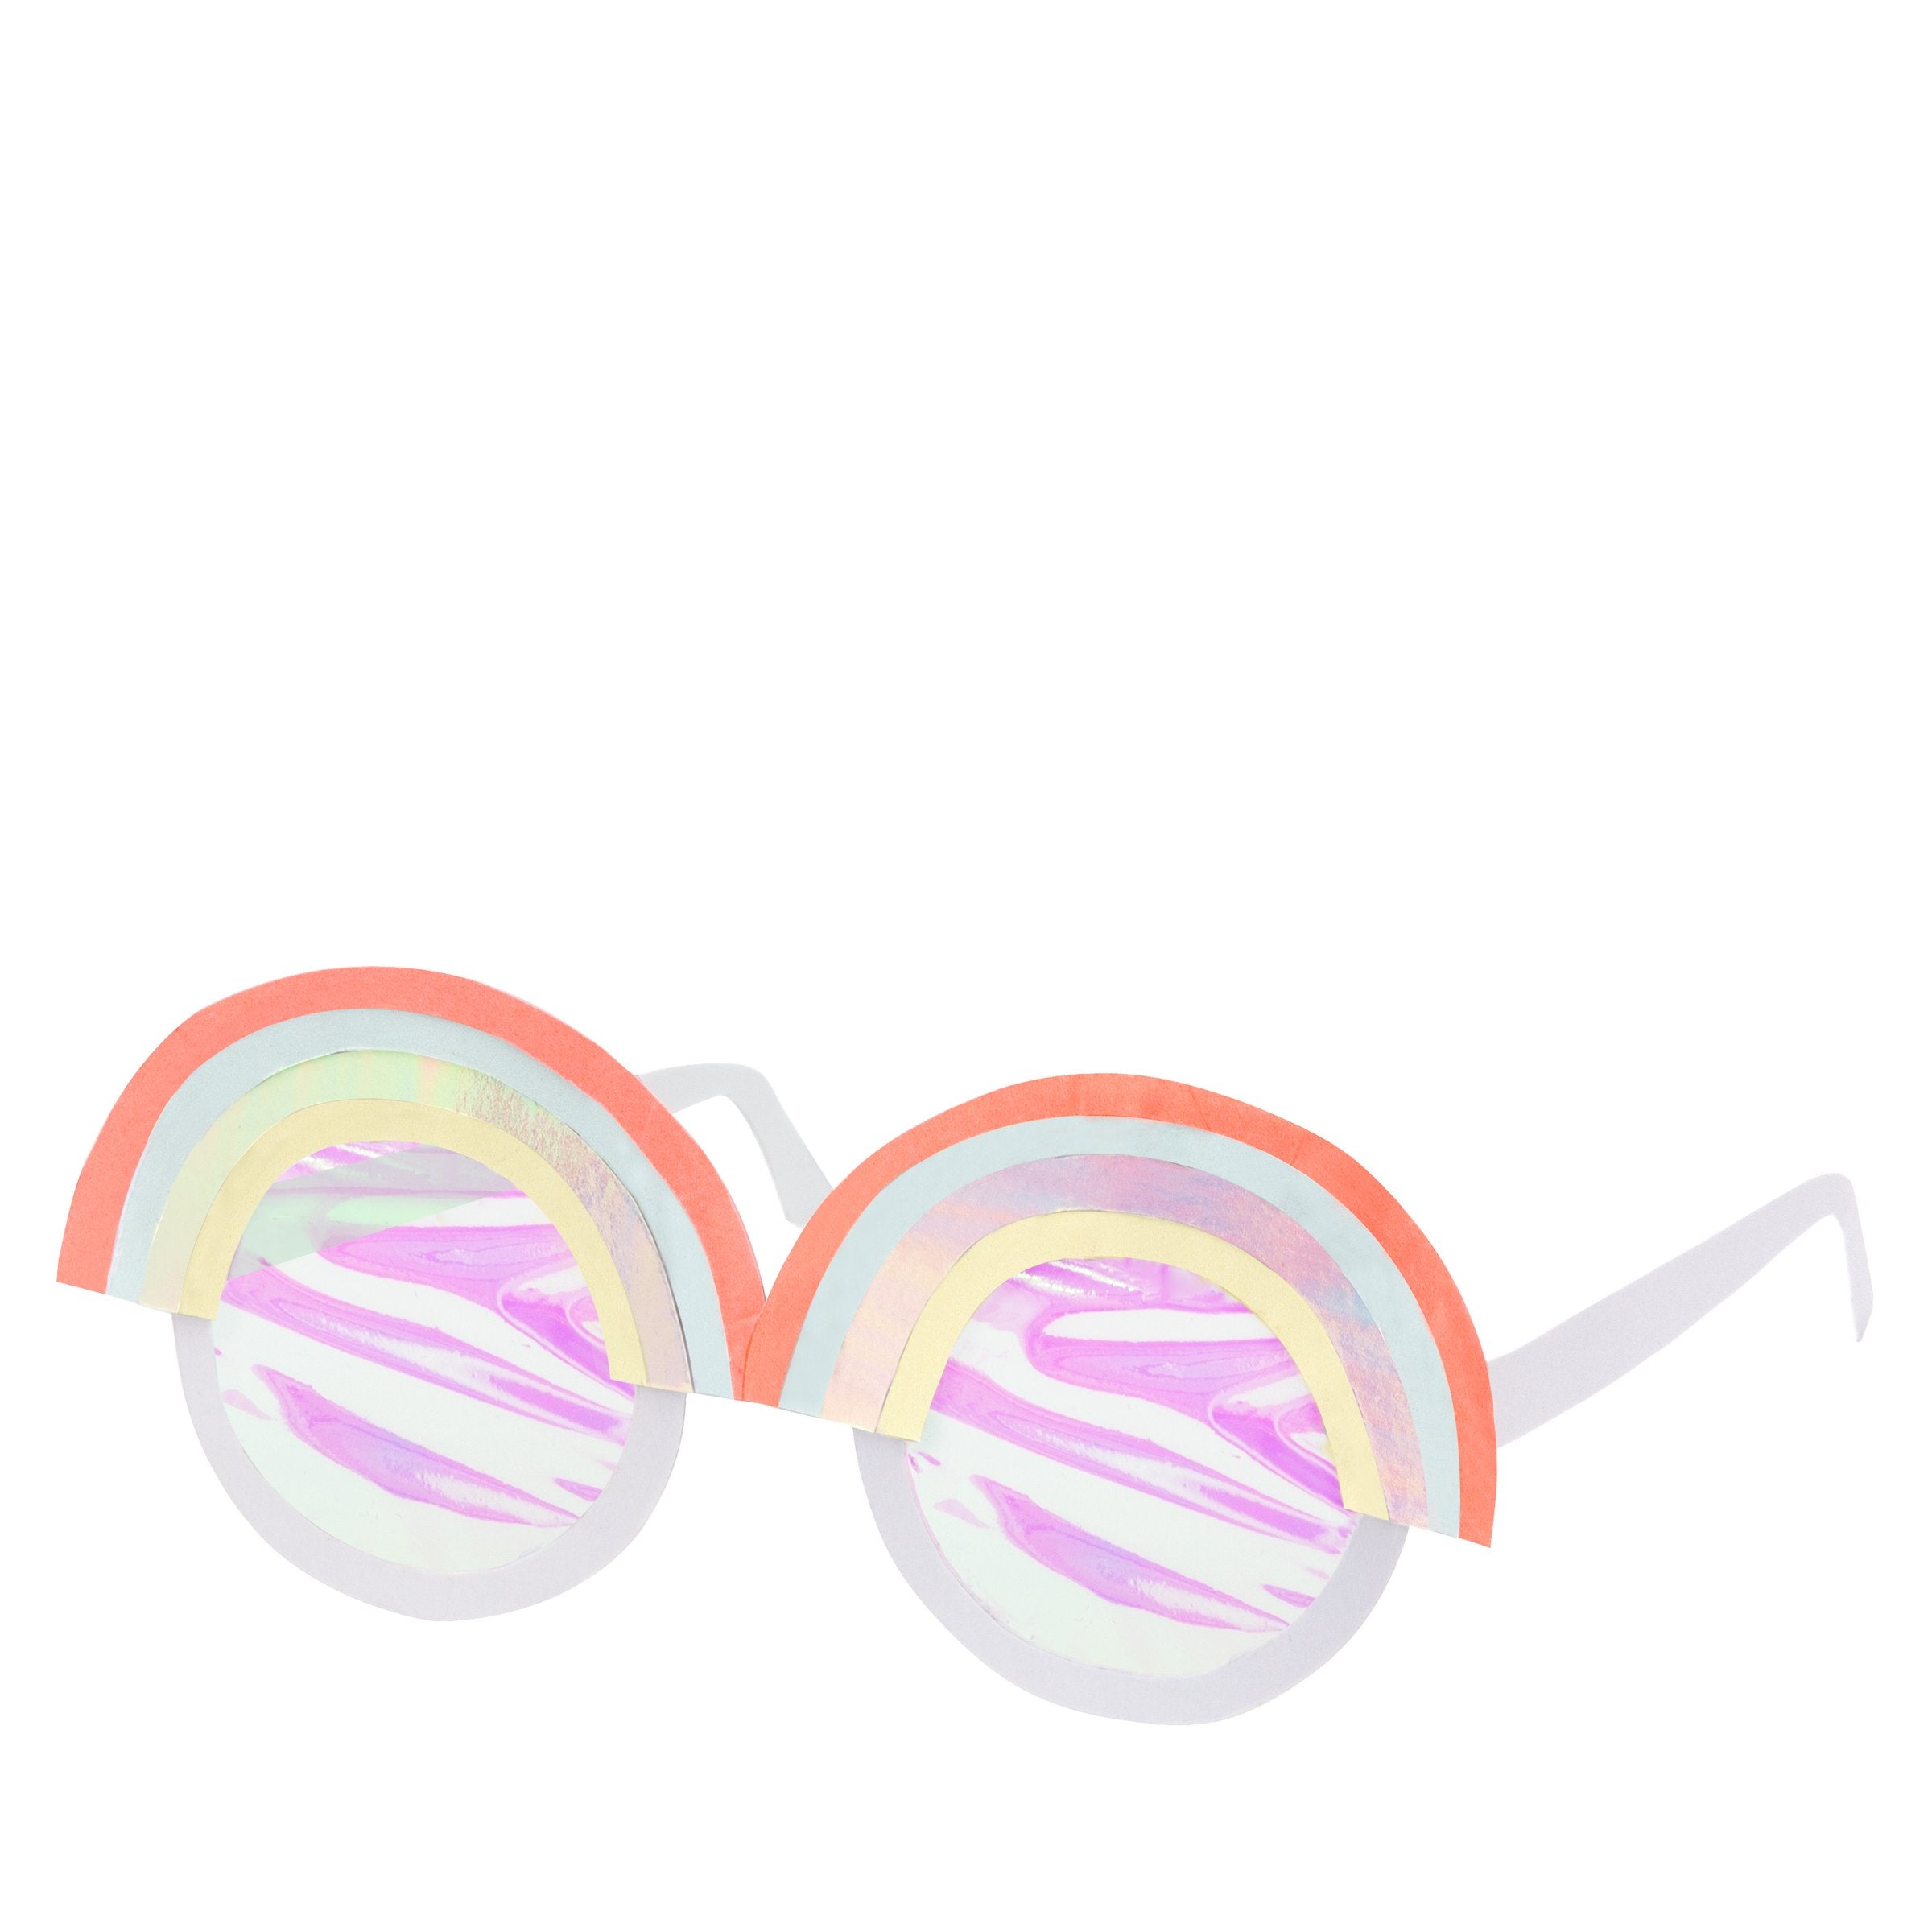 These fun rainbow glasses have iridescent lenses, and neon and holographic print detail.